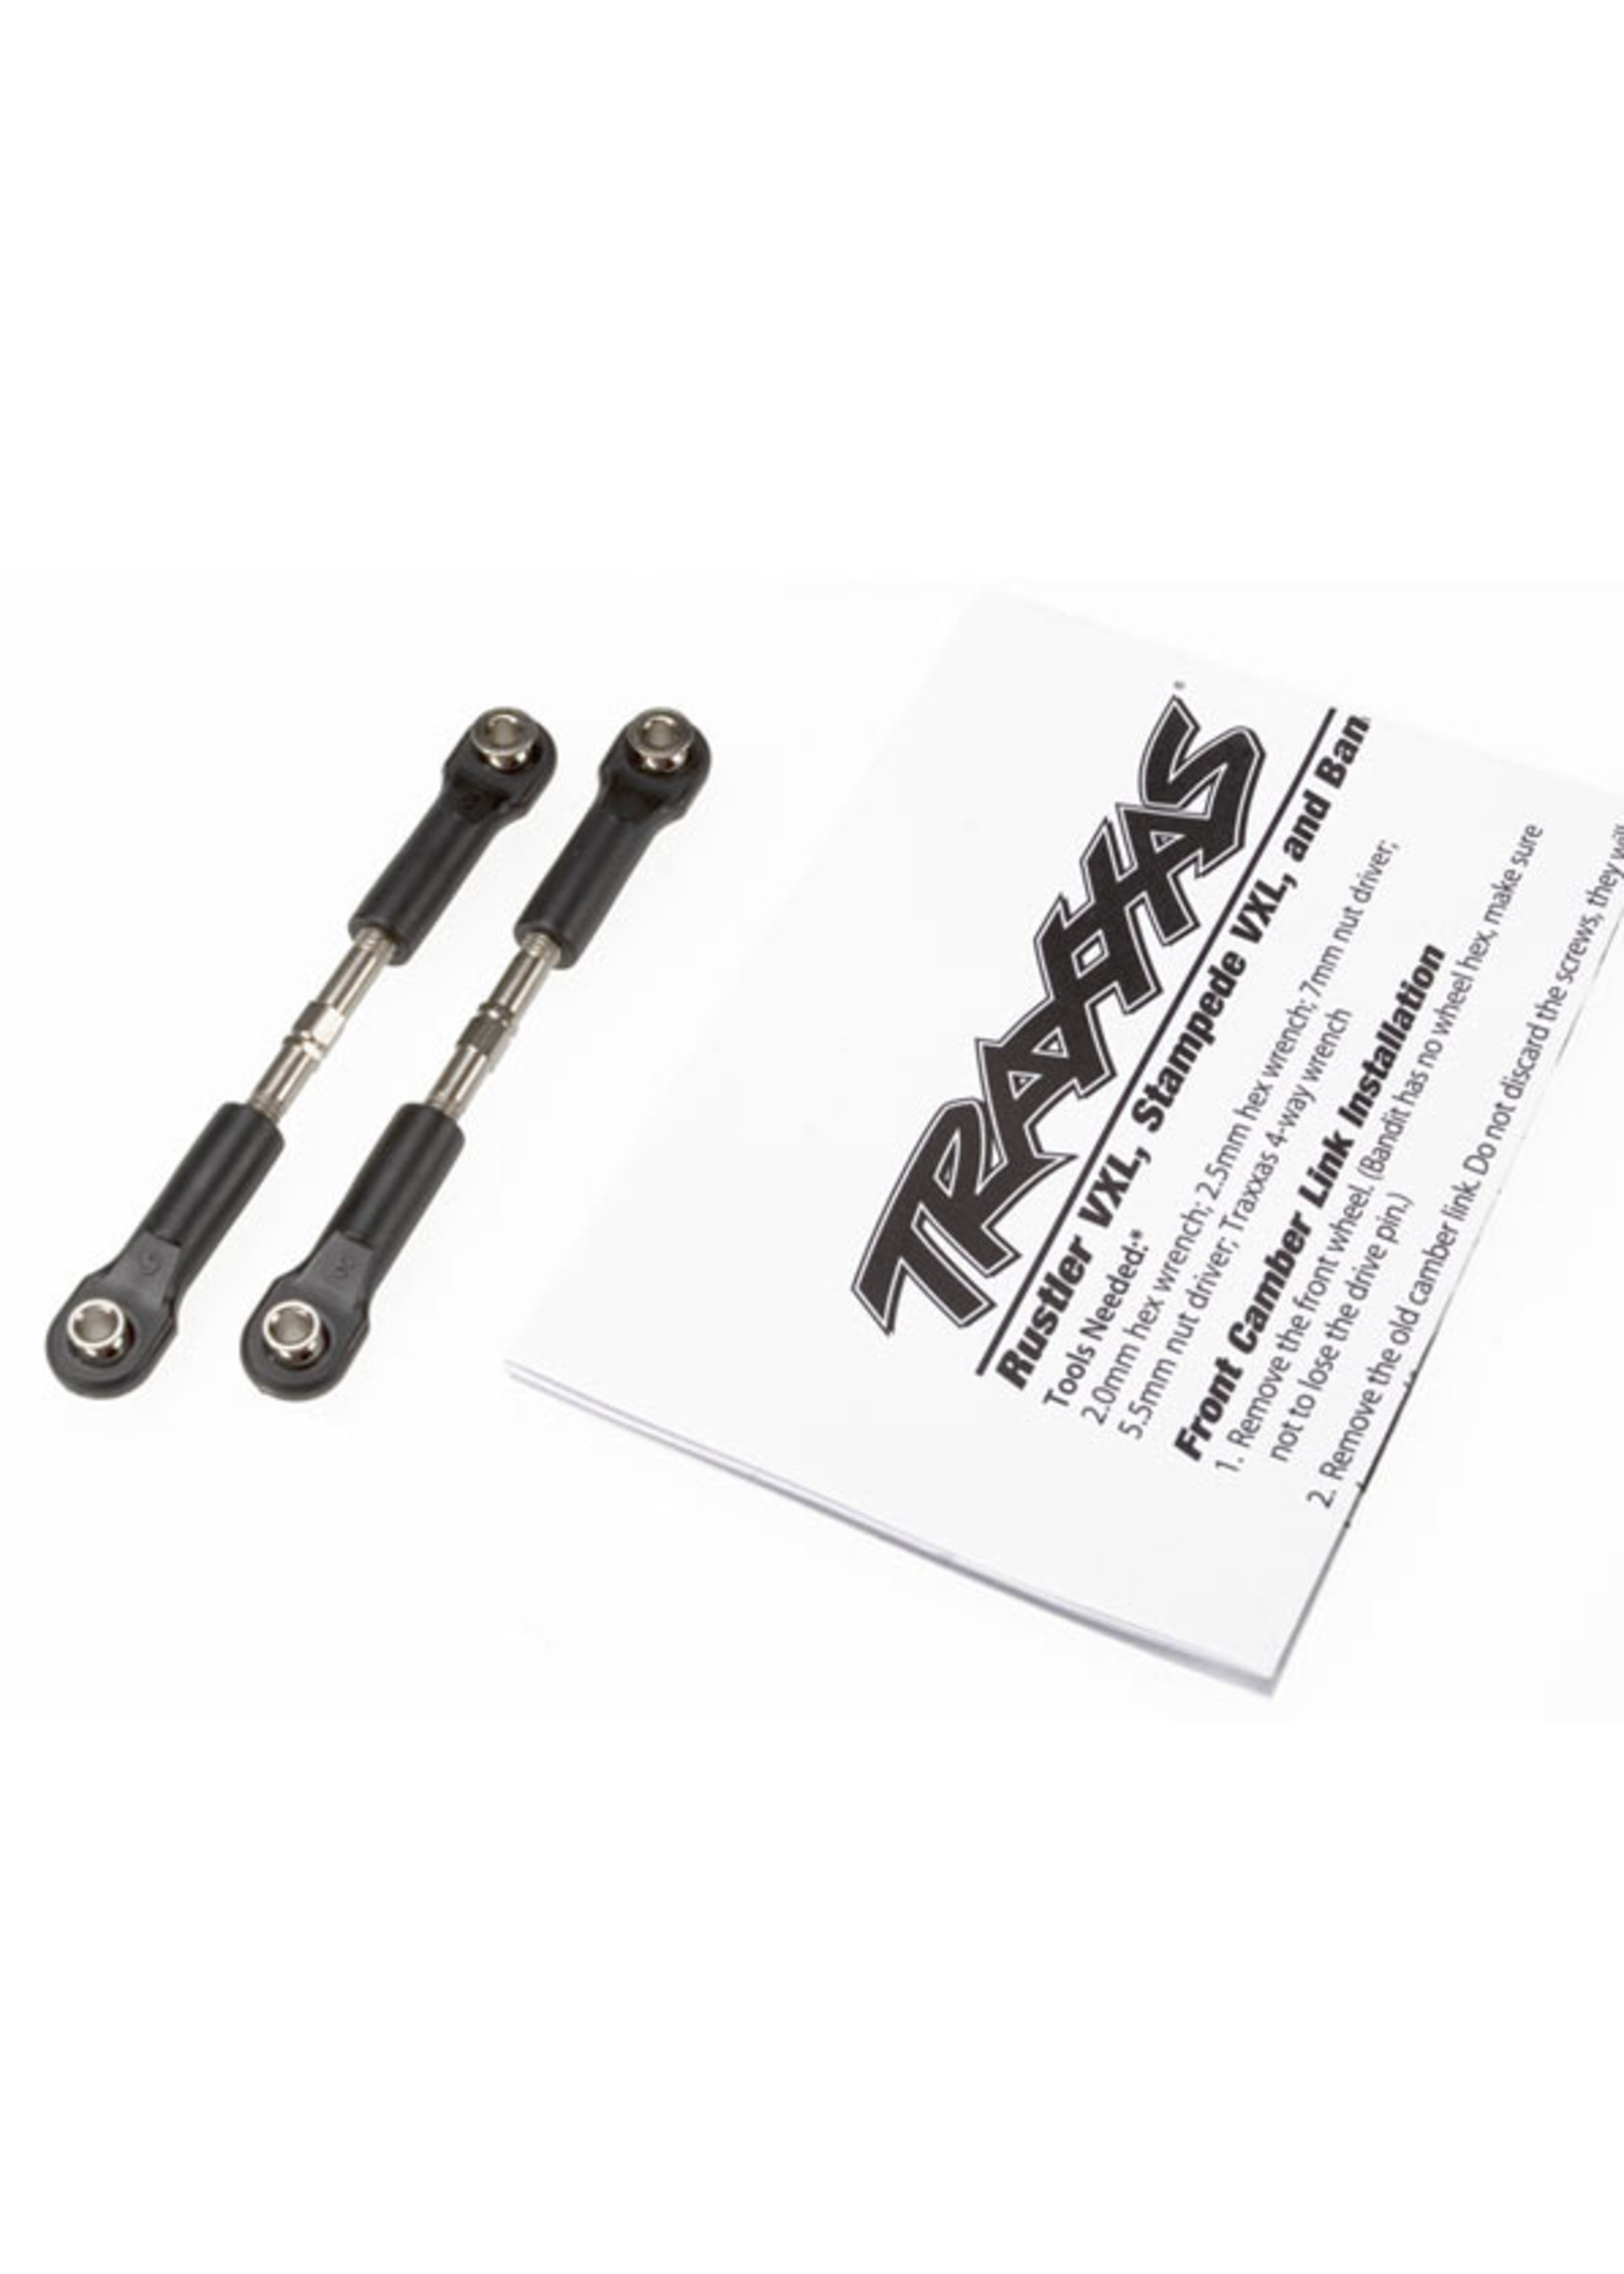 Traxxas 2443 - 36mm Camber Link Turnbuckle Set (2)